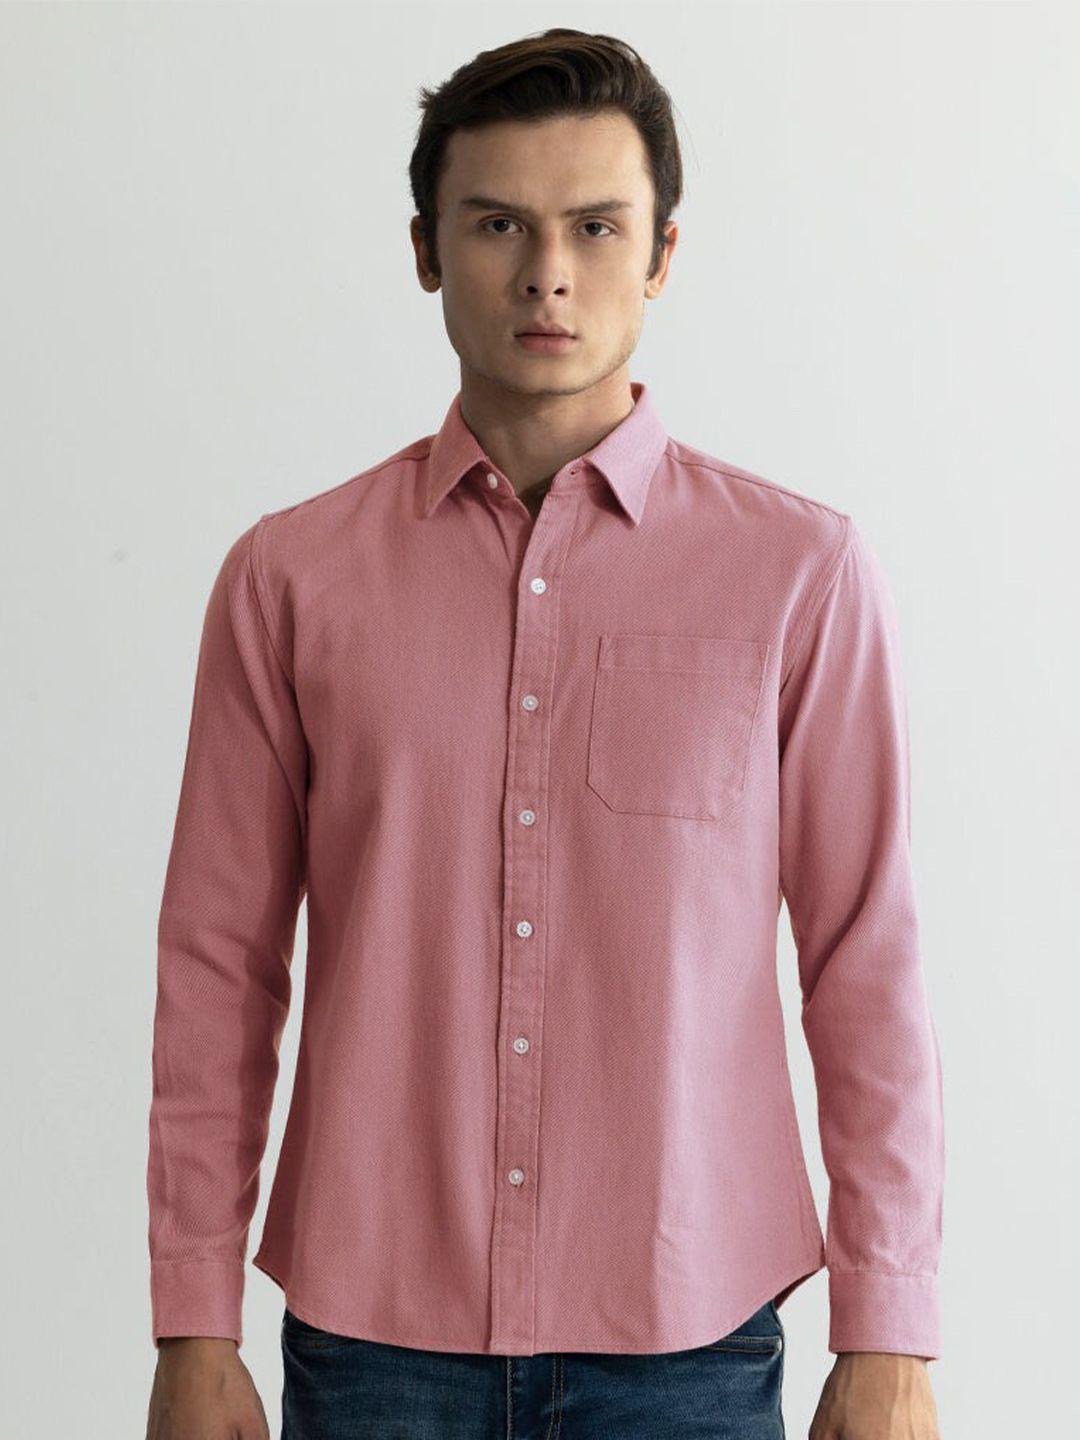 snitch-pink-classic-slim-fit-spread-collar-cotton-casual-shirt